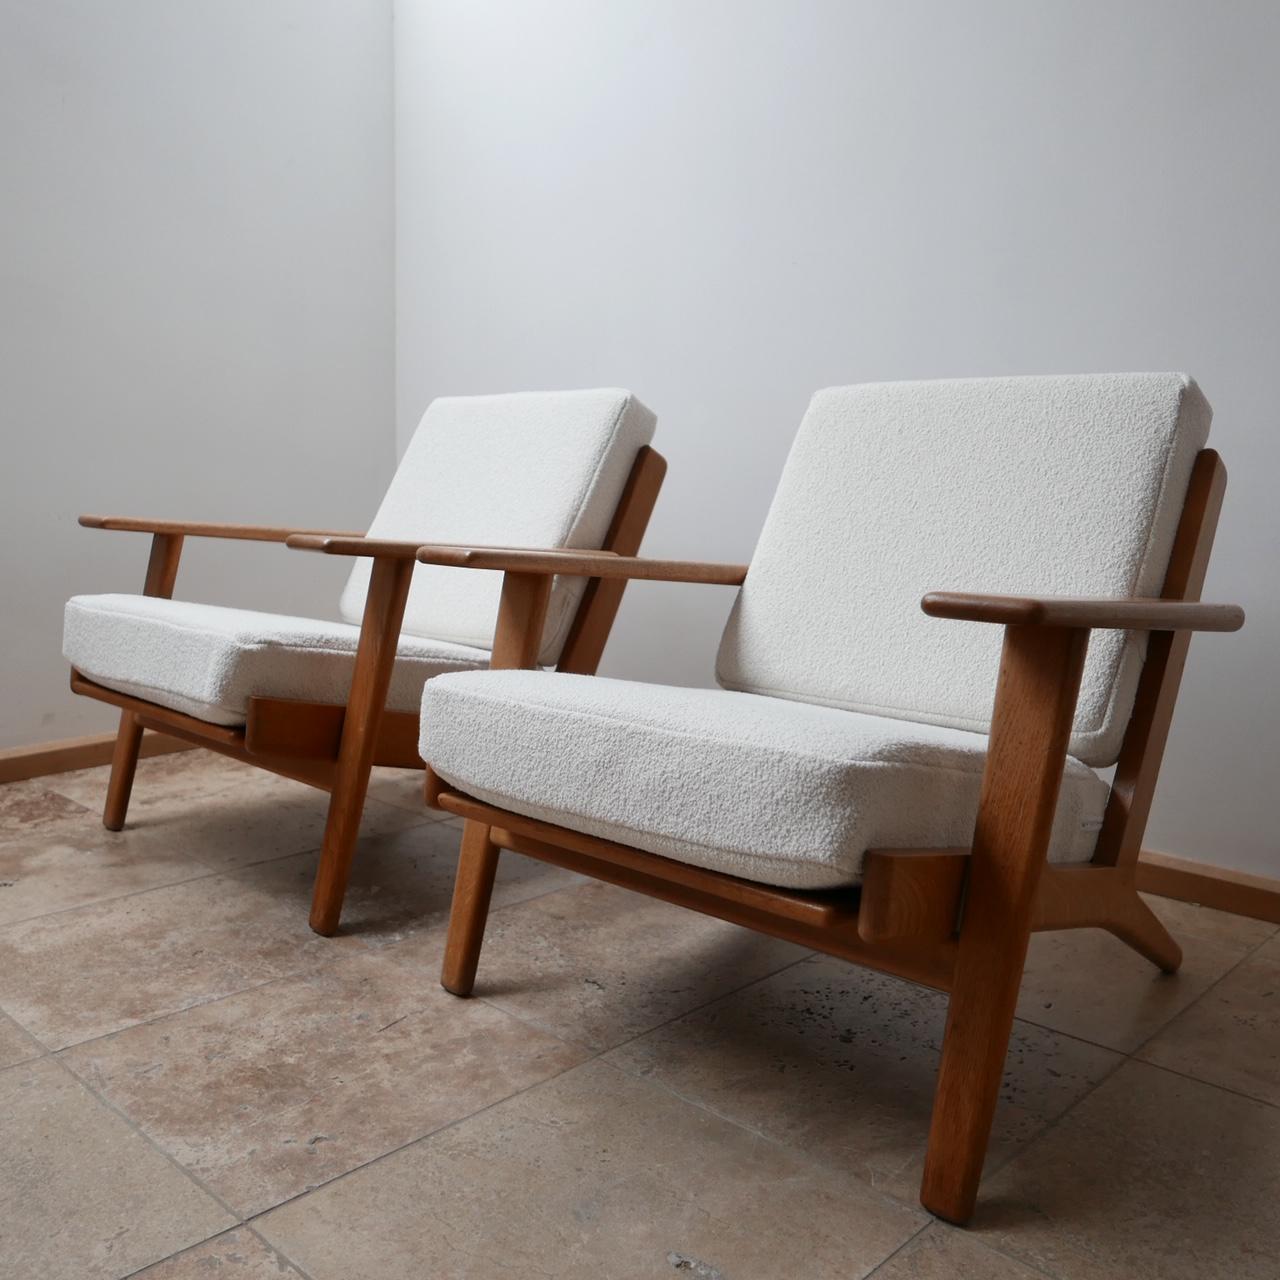 Original Hans Wegener midcentury armchairs.

A pair of the much desired GE-209 model.

Swedish, circa 1960s for GETAMA.

Timeless and legendary design.

Completely professionally re-upholstered in white bouclé from Chase